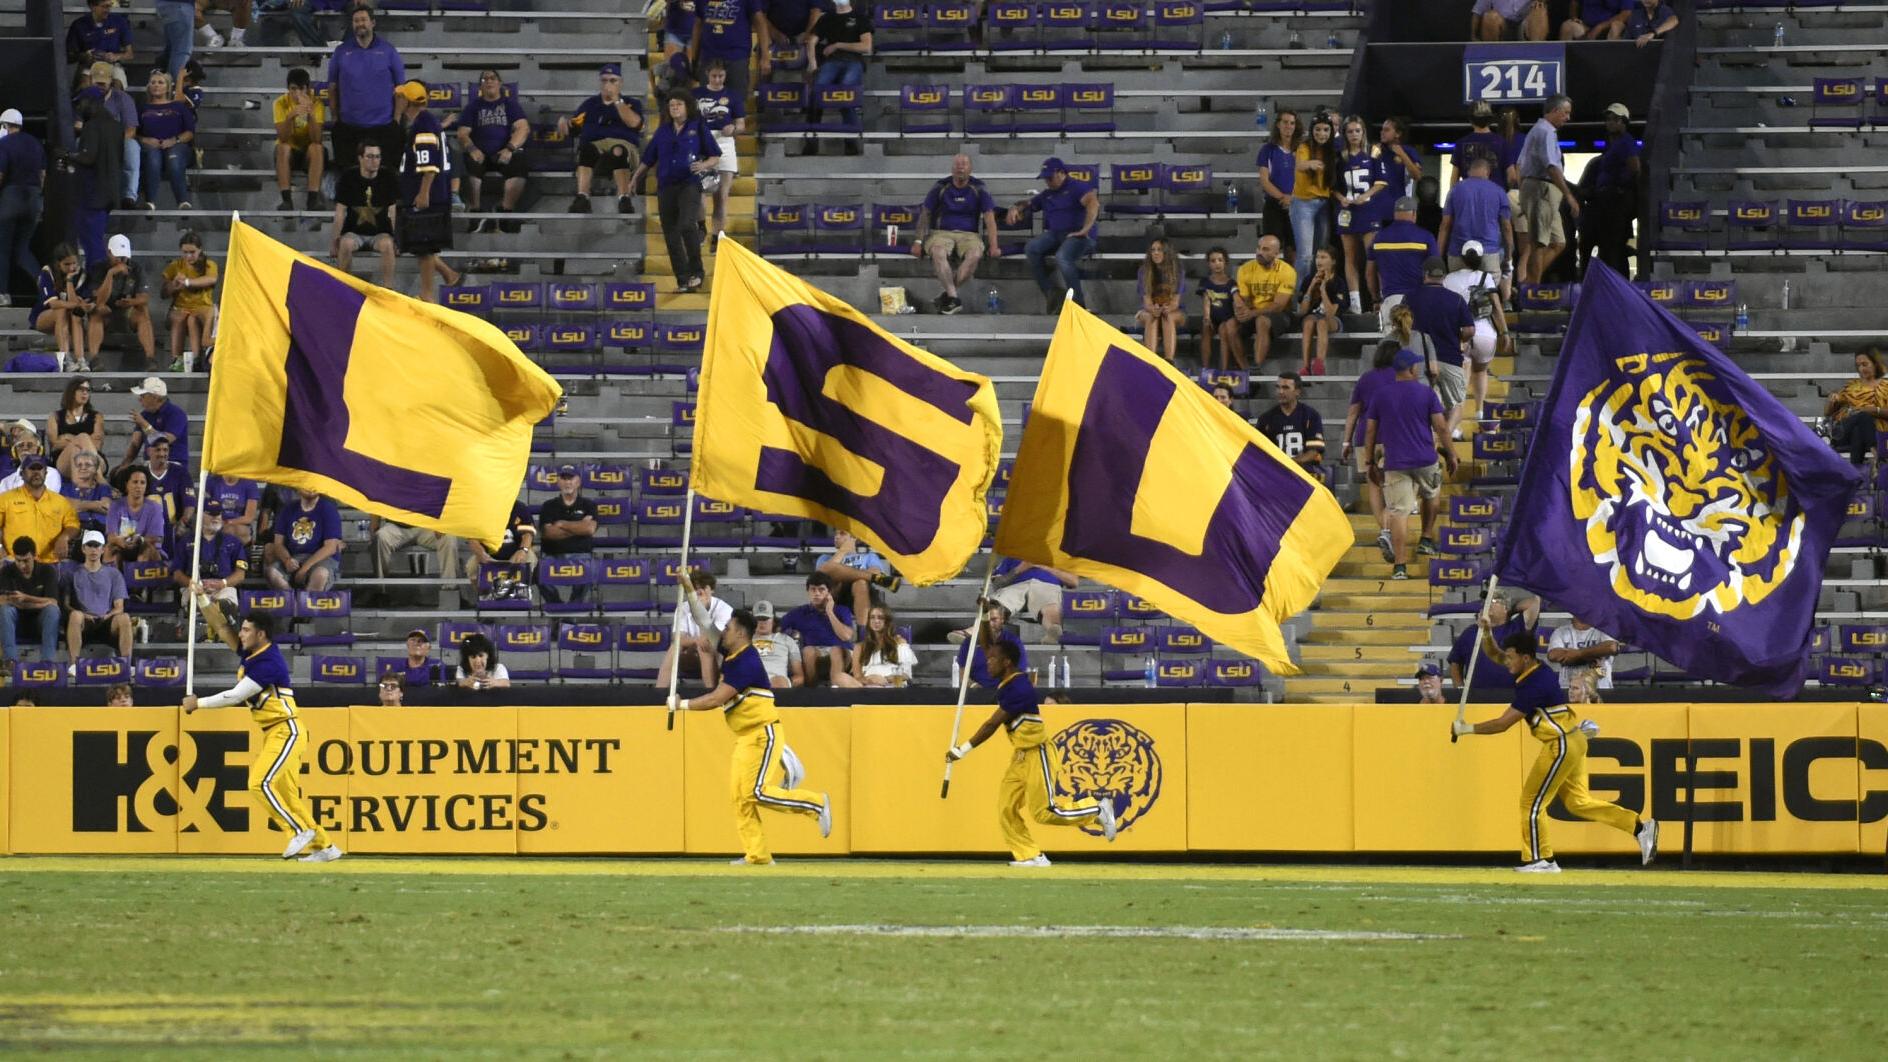 Lsu Calendar 2022 Ready For 2022? Lsu Football Schedule Released; See The Tigers' Key Dates,  Opponents | Lsu | Theadvocate.com